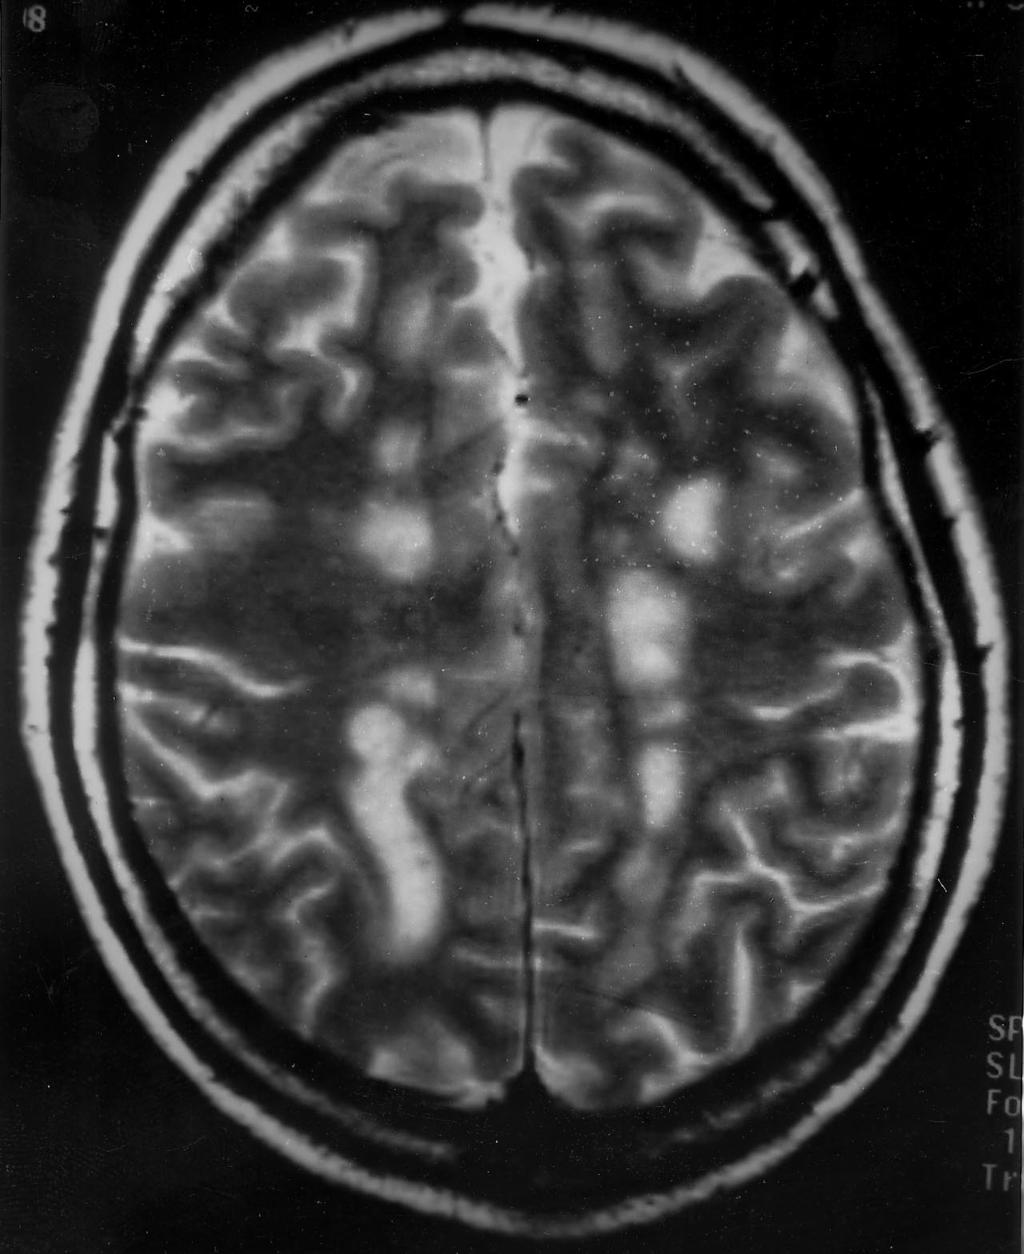 There are areas of increased signal (white) in the white matter of the brain.